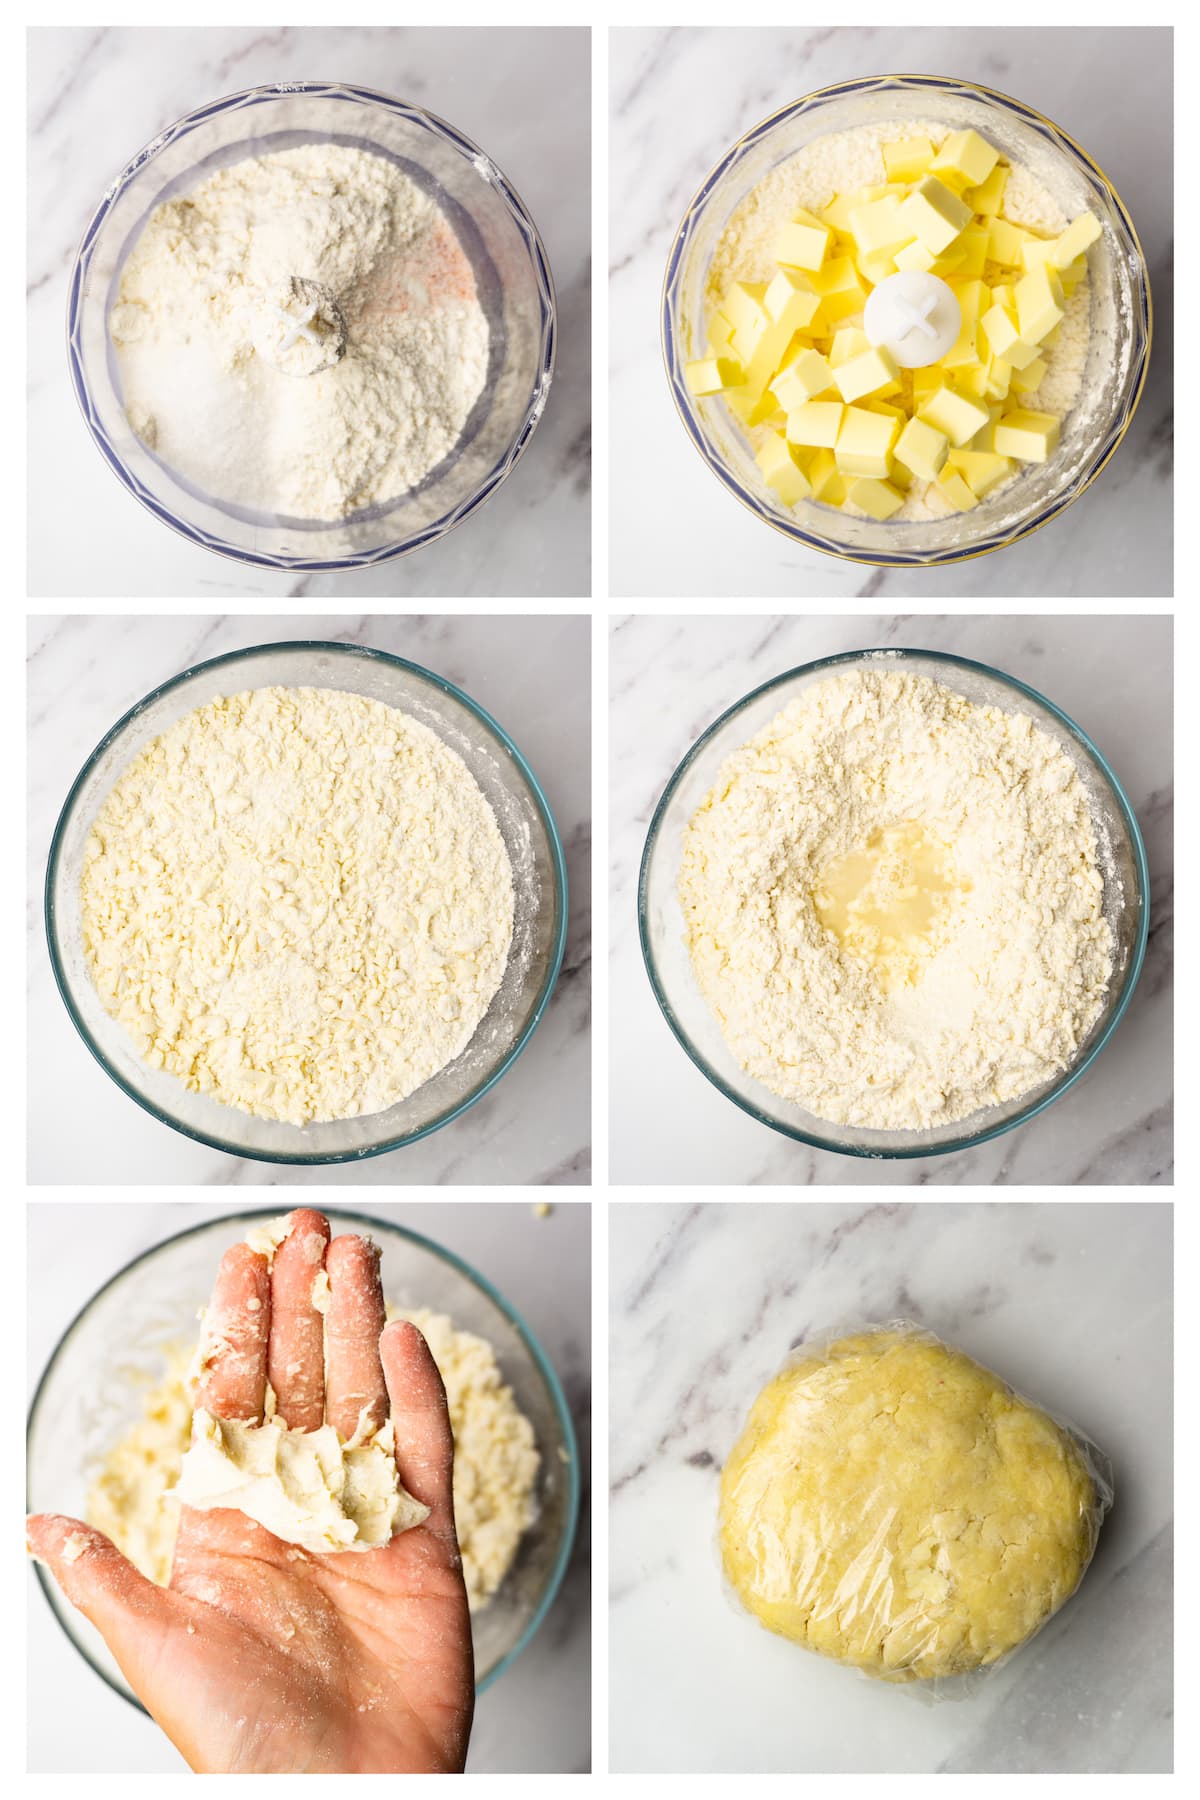 Collage image showing how to make apple pie crust.